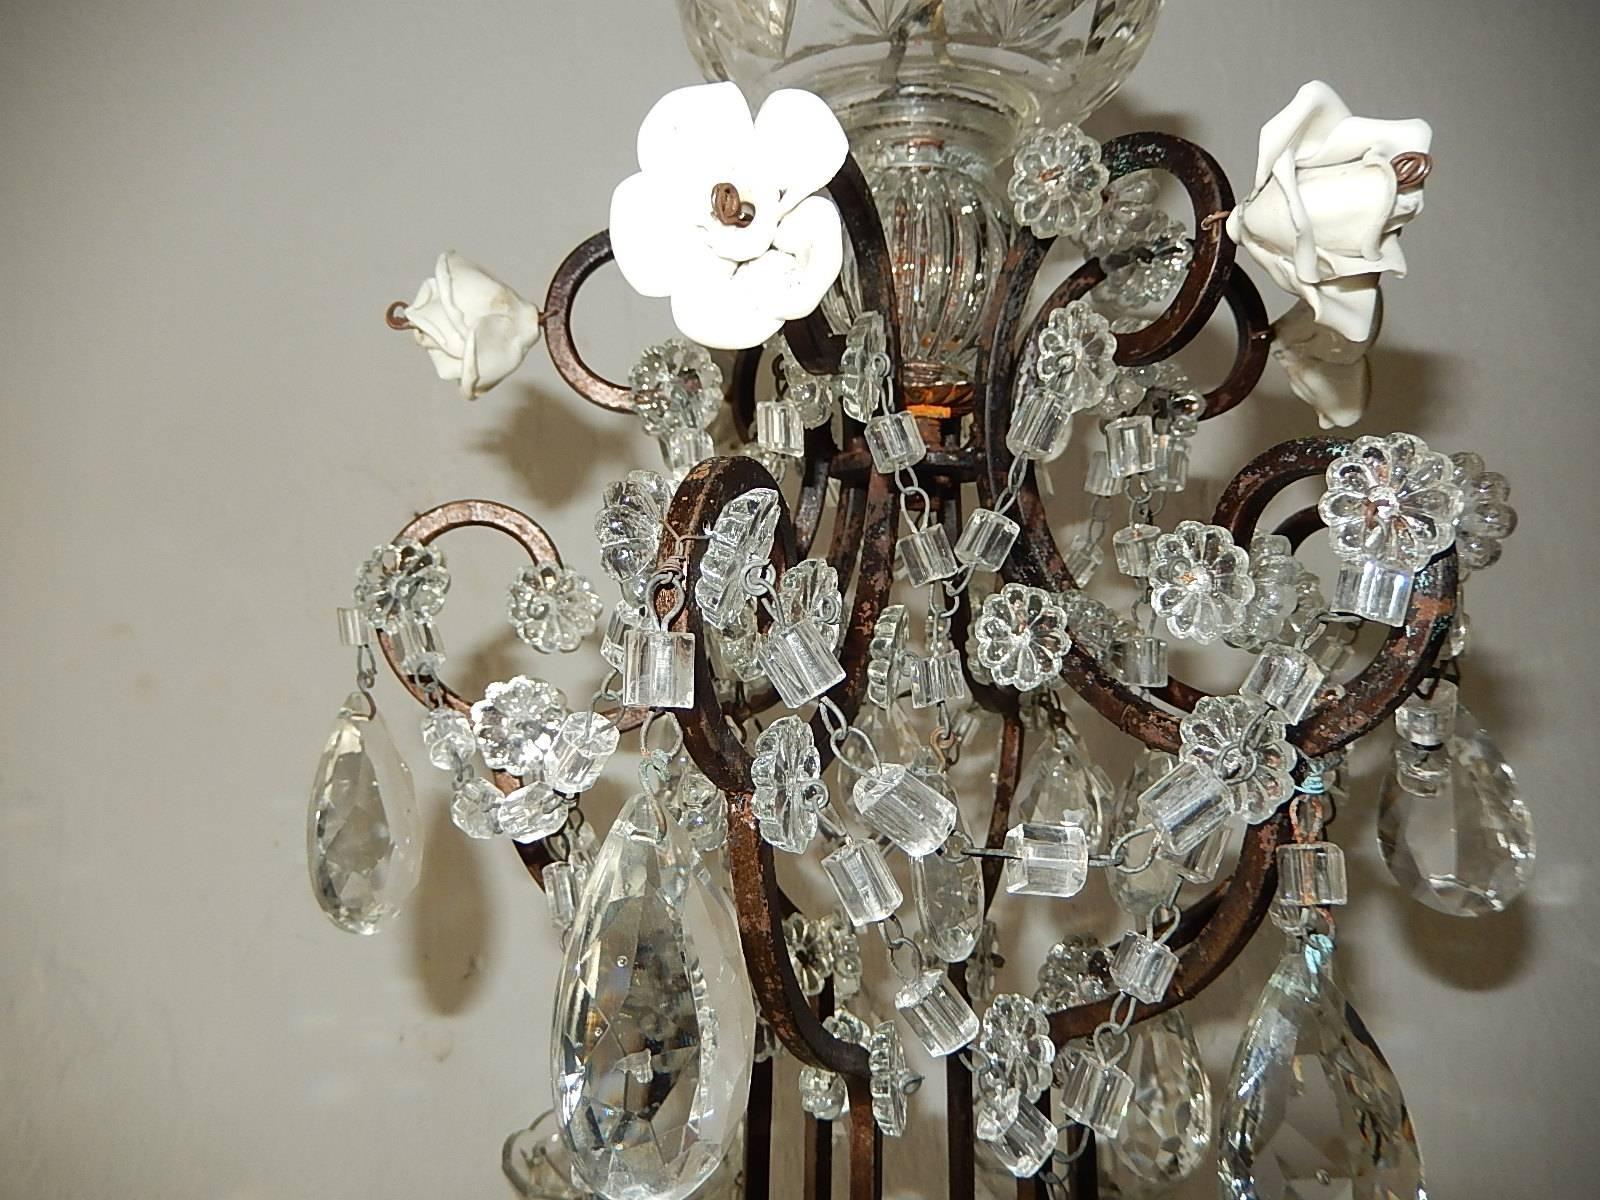 1920 French Elegant Crystal Prisms and Swags with White Roses Chandelier 2